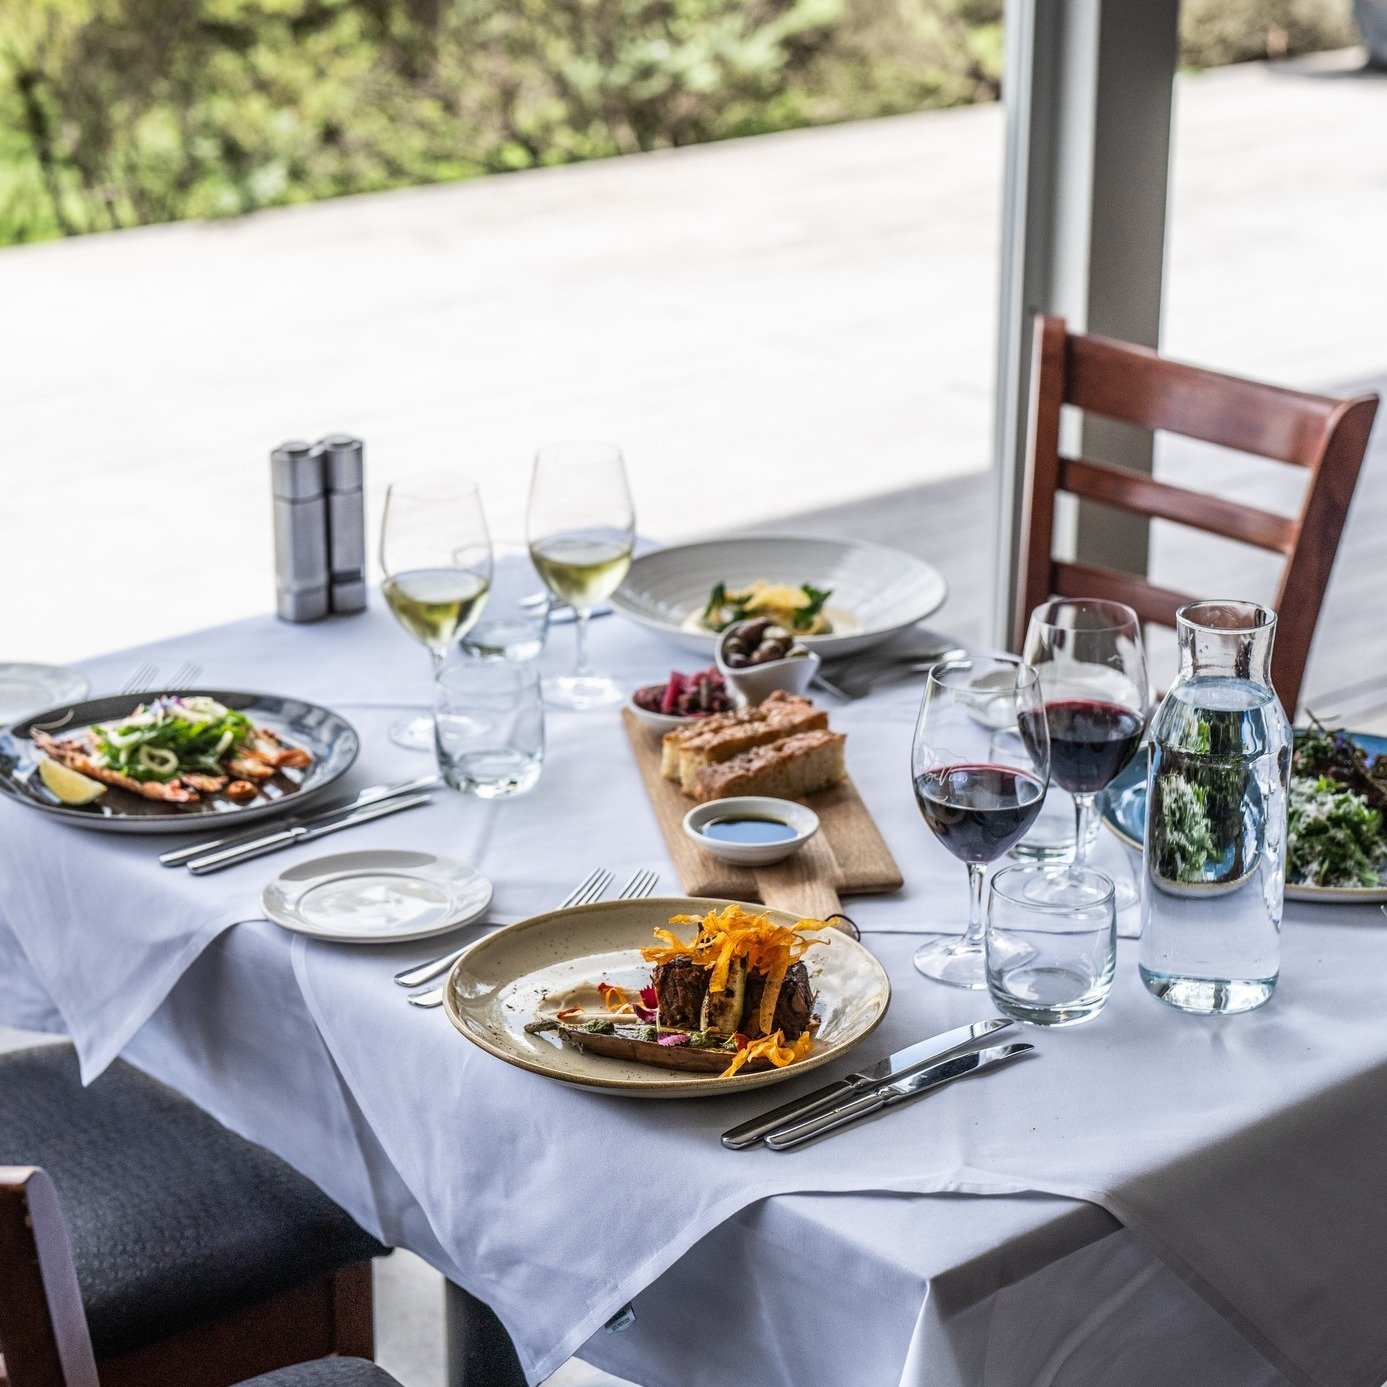 Are you still looking for a place to spoil Mum this Mothers Day?
Harvest at RidgeView has you covered.
We still have breakfast booking available and a few late lunch too.
Book now at https://www.ridgeview.com.au/harvest-restaurant
All Mum's get a fre